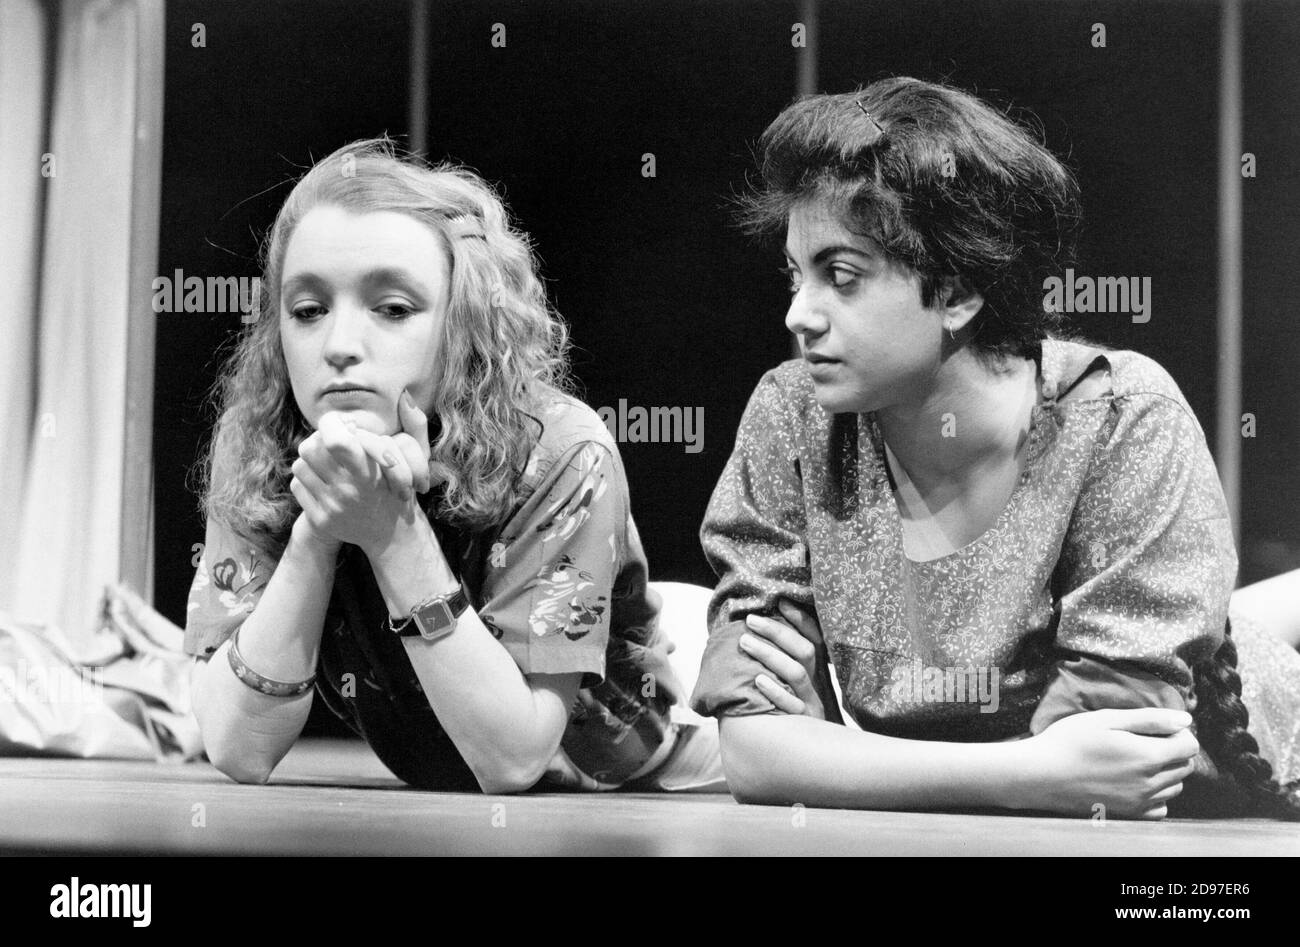 l-r: Lesley Manville (Susan), Rita Wolf (Amina) in BORDERLINE by Hanif Kureishi at the Royal Court Theatre, London SW1  05/11/1981  a co-production with the Joint Stock Theatre Group  design: Peter Hartwell & Anabel Temple  lighting: Hugh Laver  director: Max Stafford-Clark Stock Photo